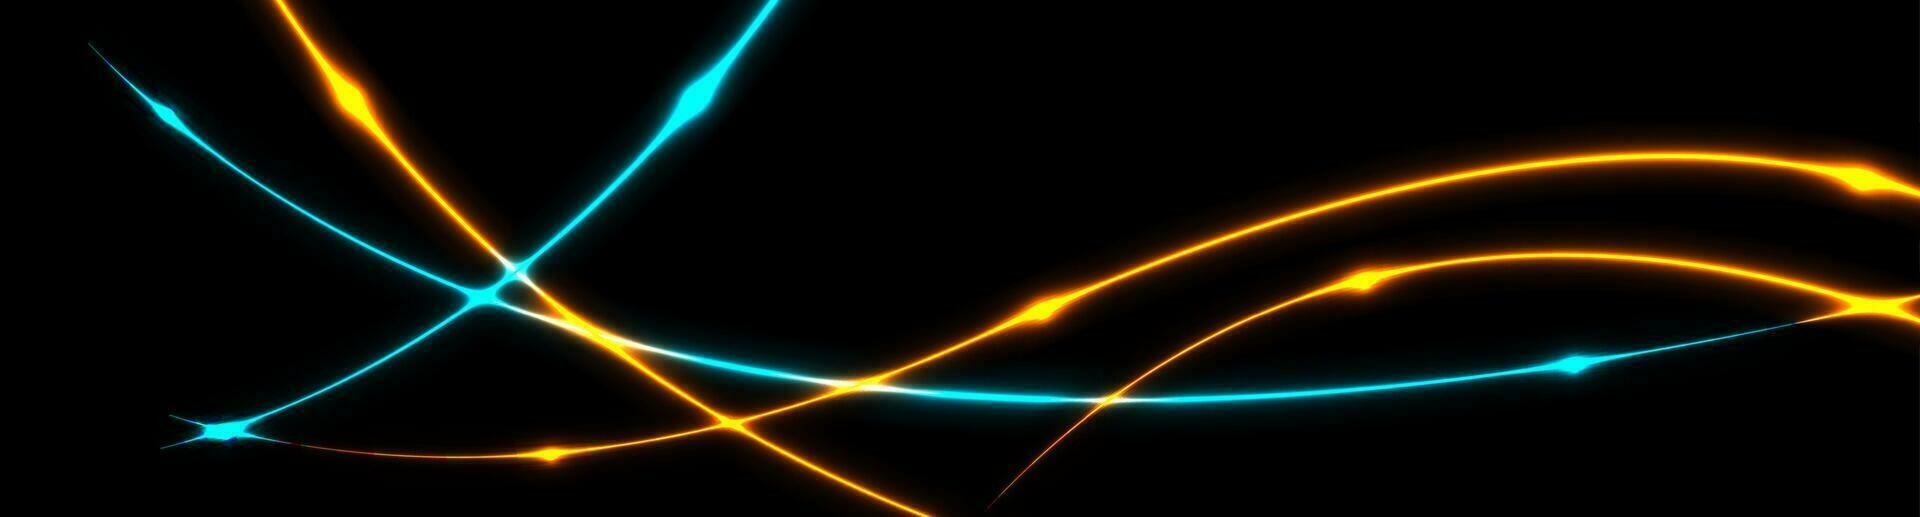 Neon wavy lines abstract glowing background vector